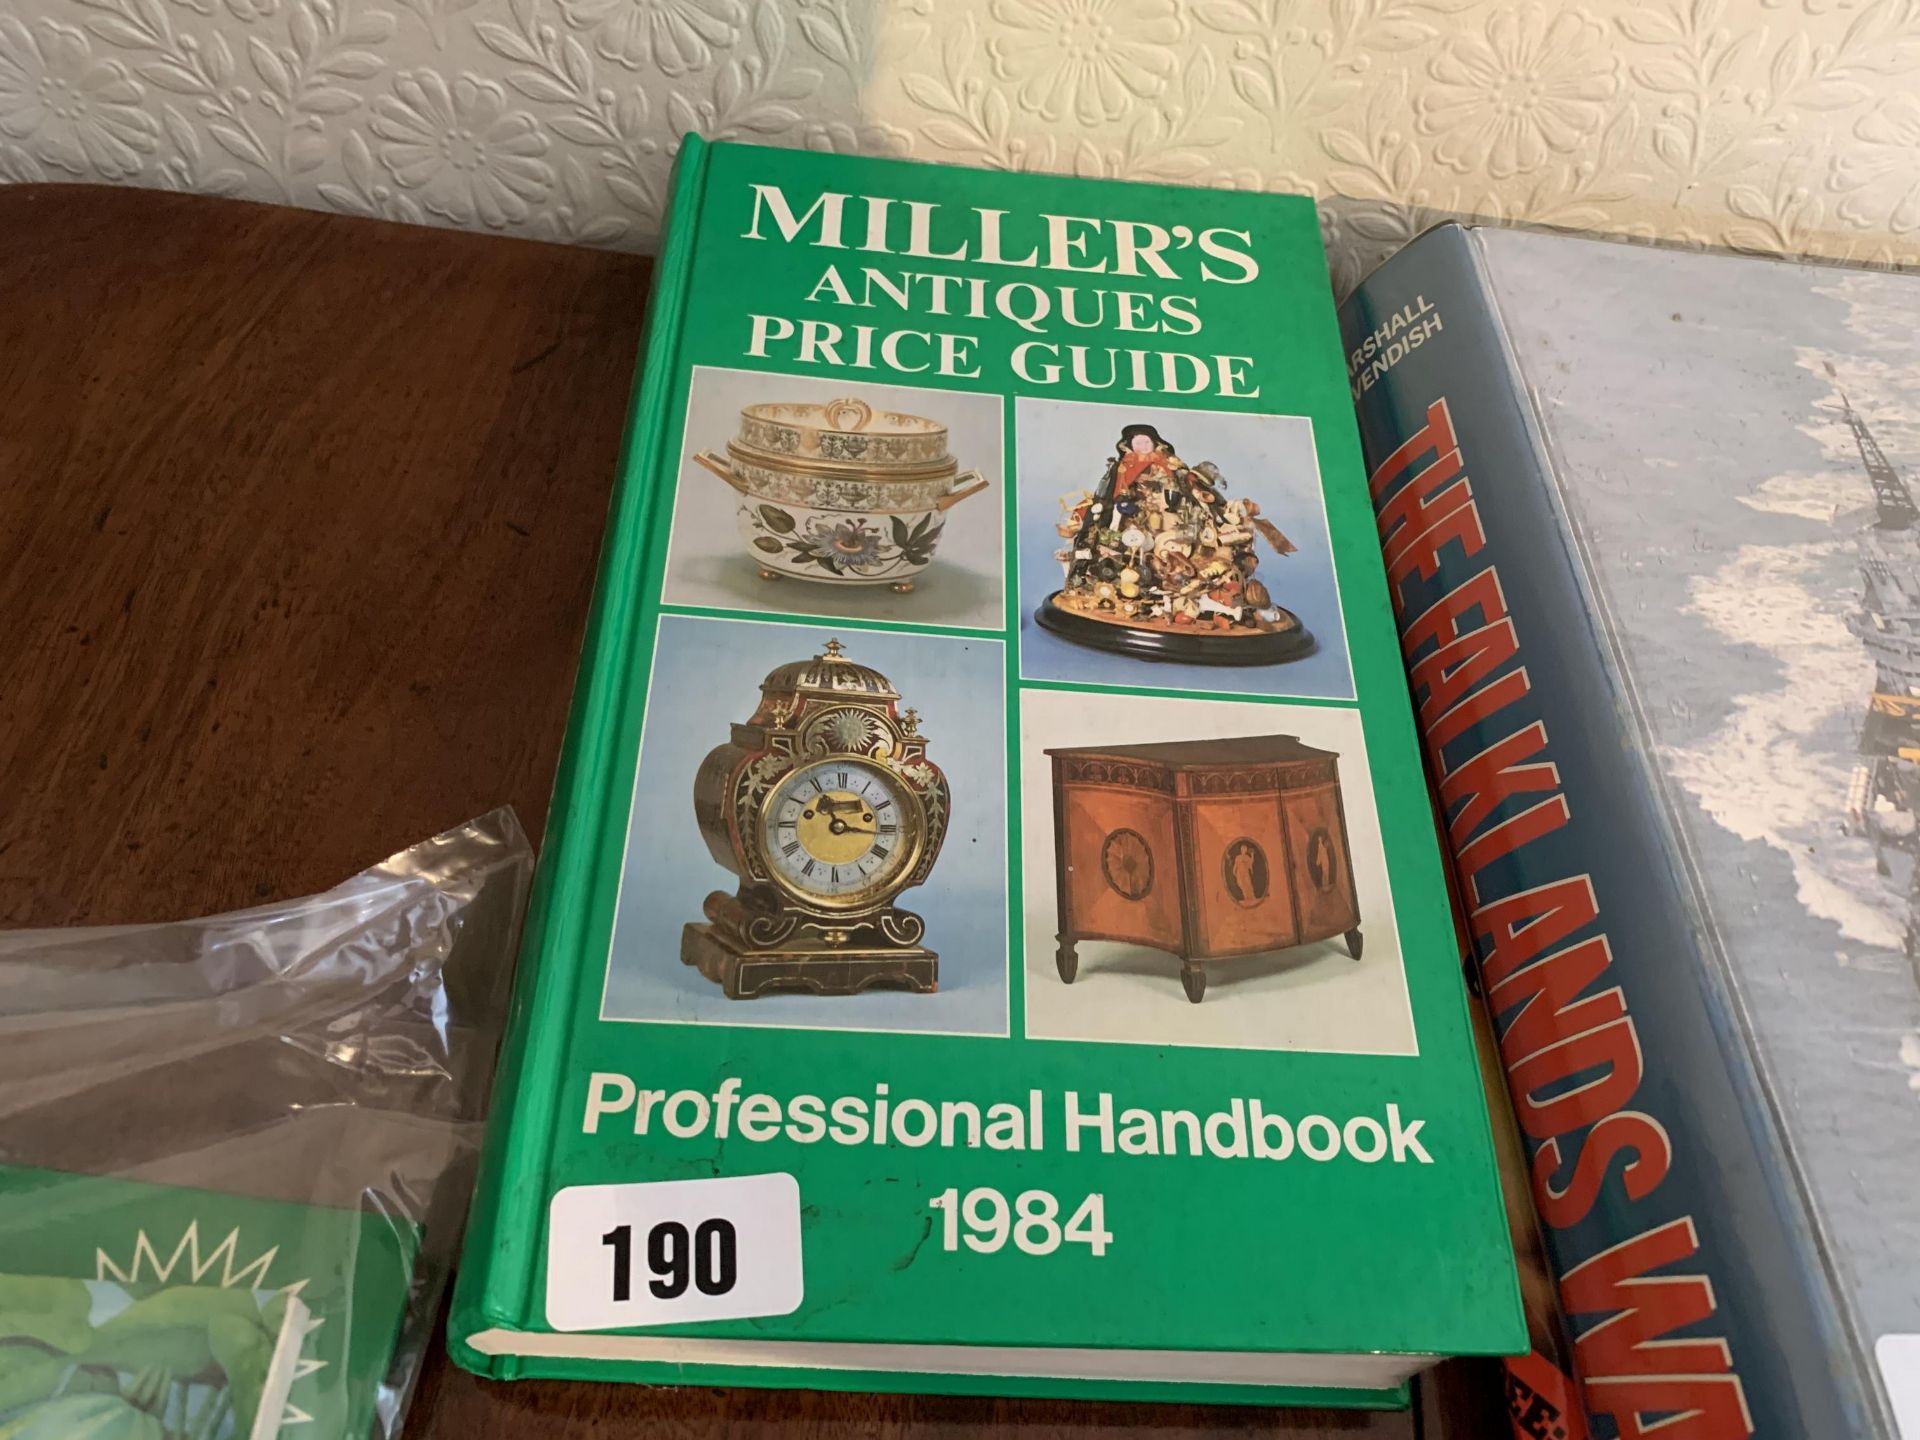 Millers Antique Guide 1984